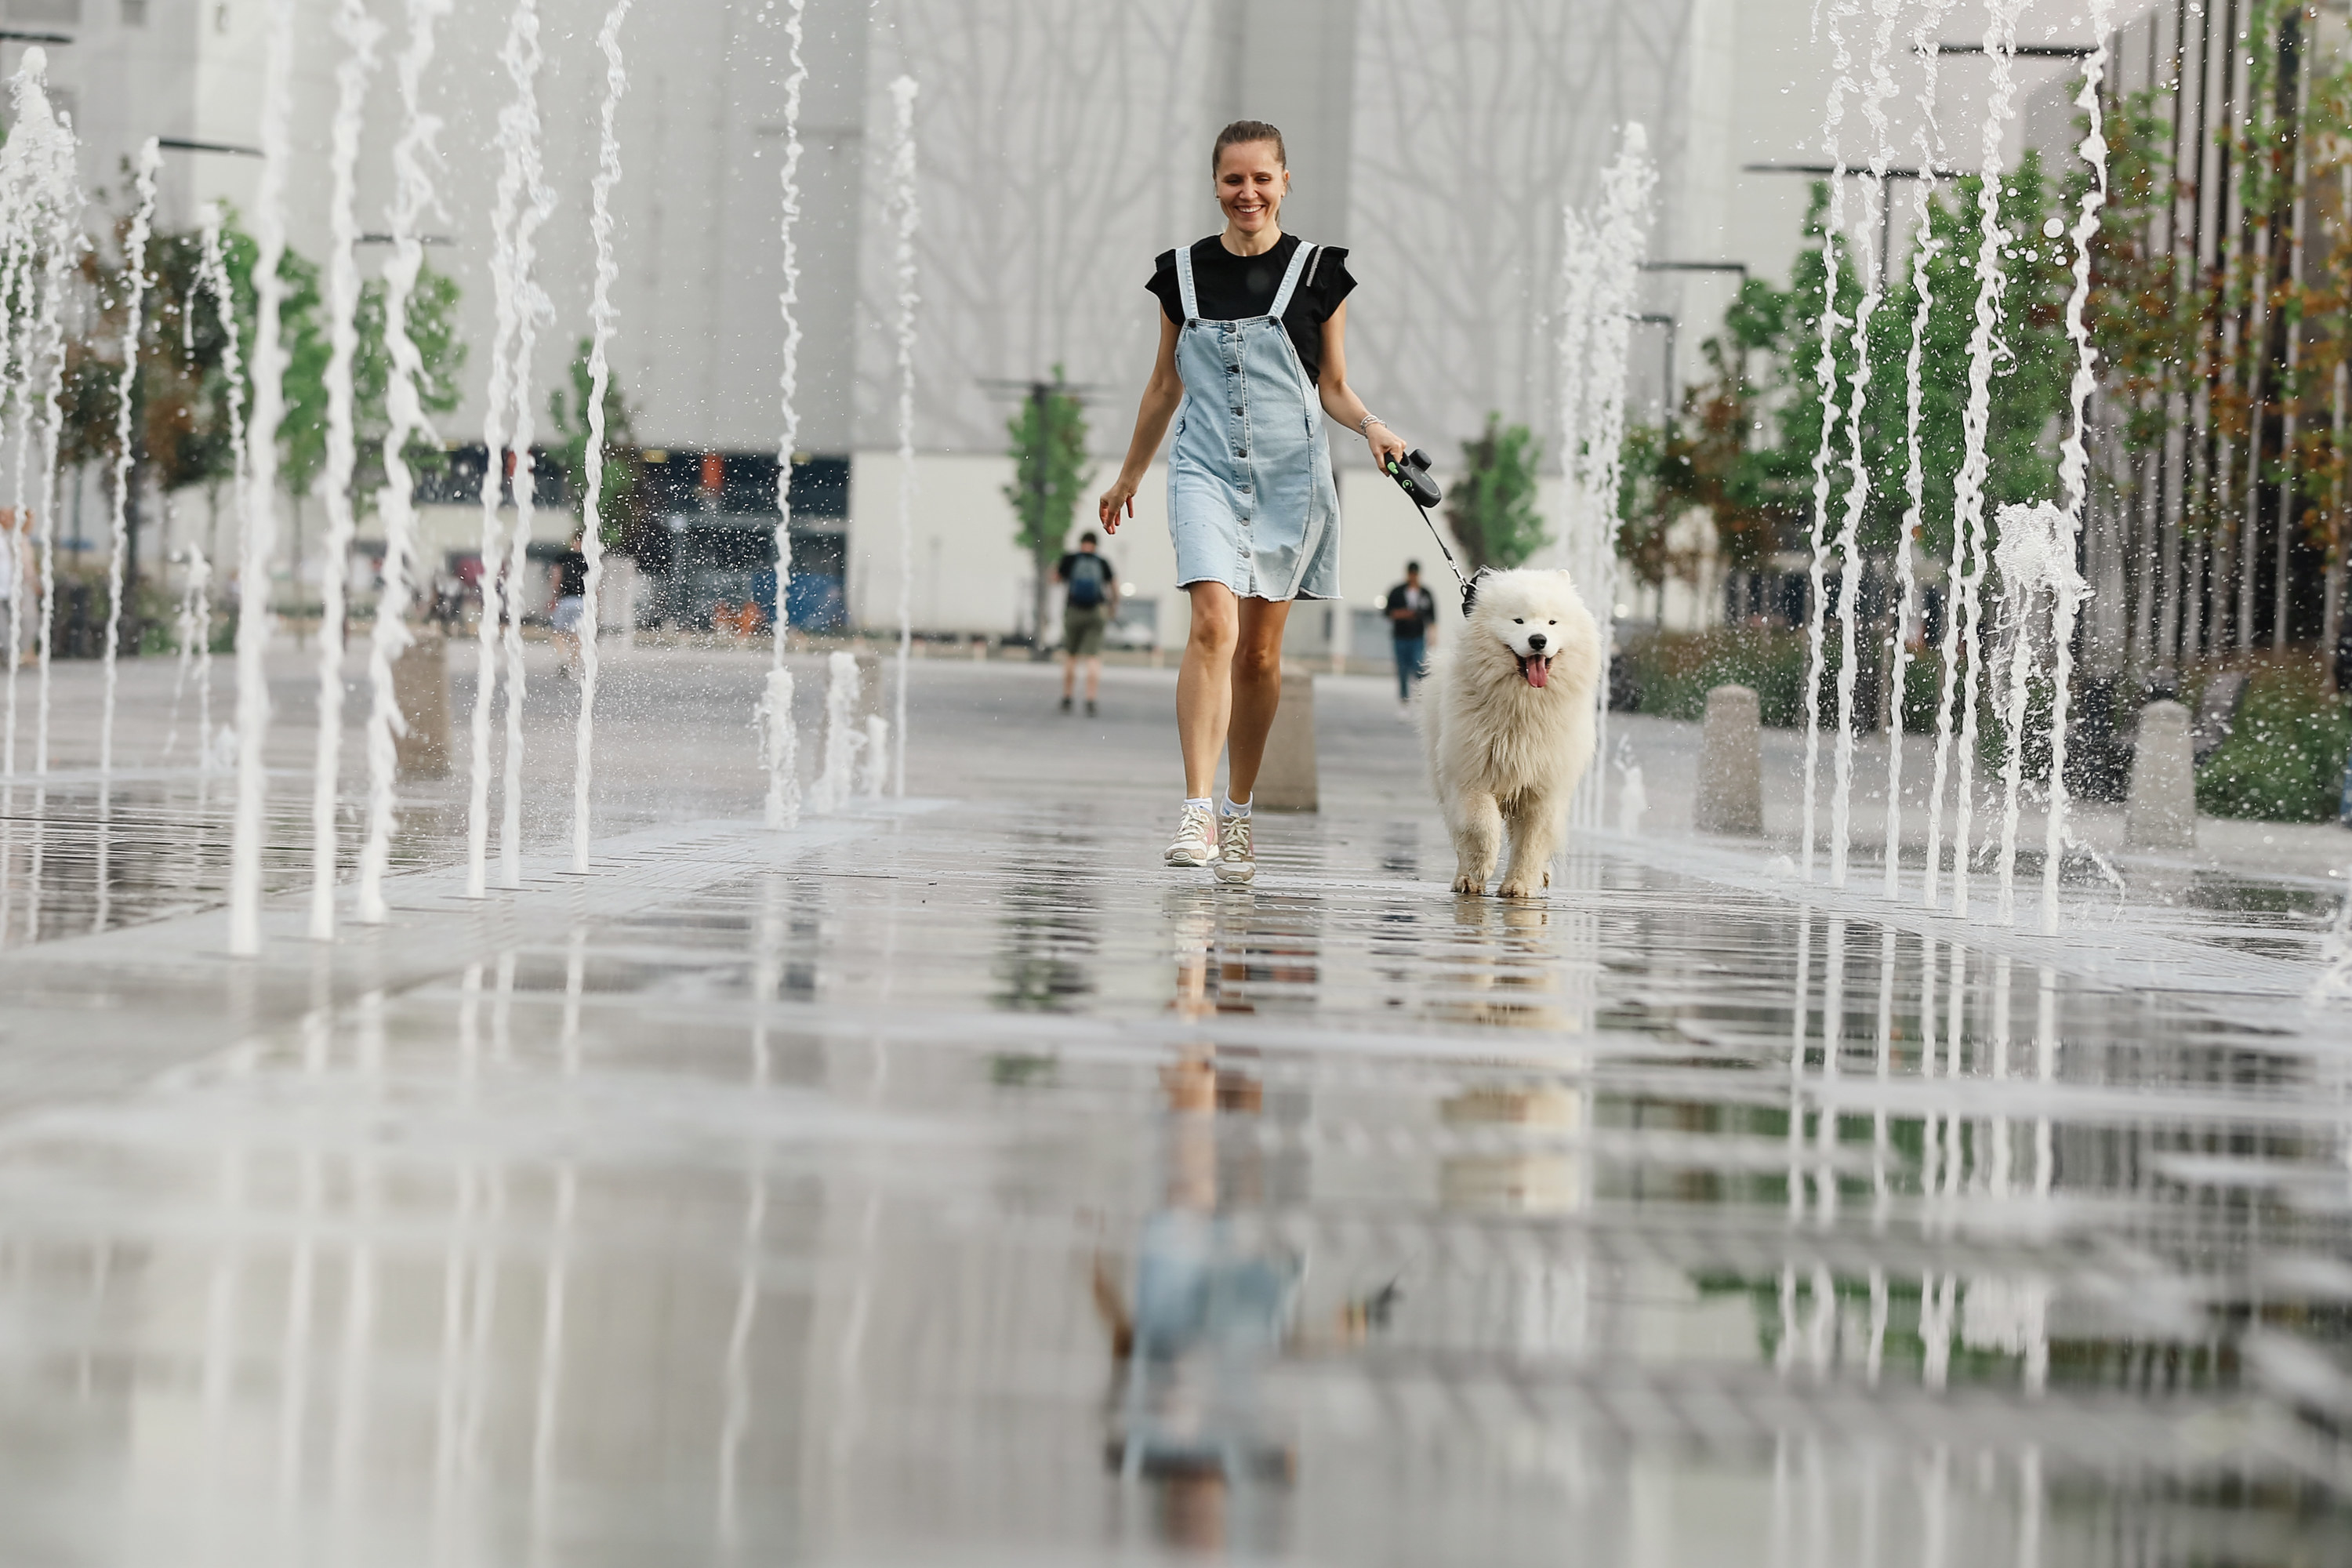 Confidence Woman In Denim Clothes With Cute Young Samoyed Dog Running Through The Fountain Area Against Blurred Cityscape Background. Real People, Ambient Light, Copy Space